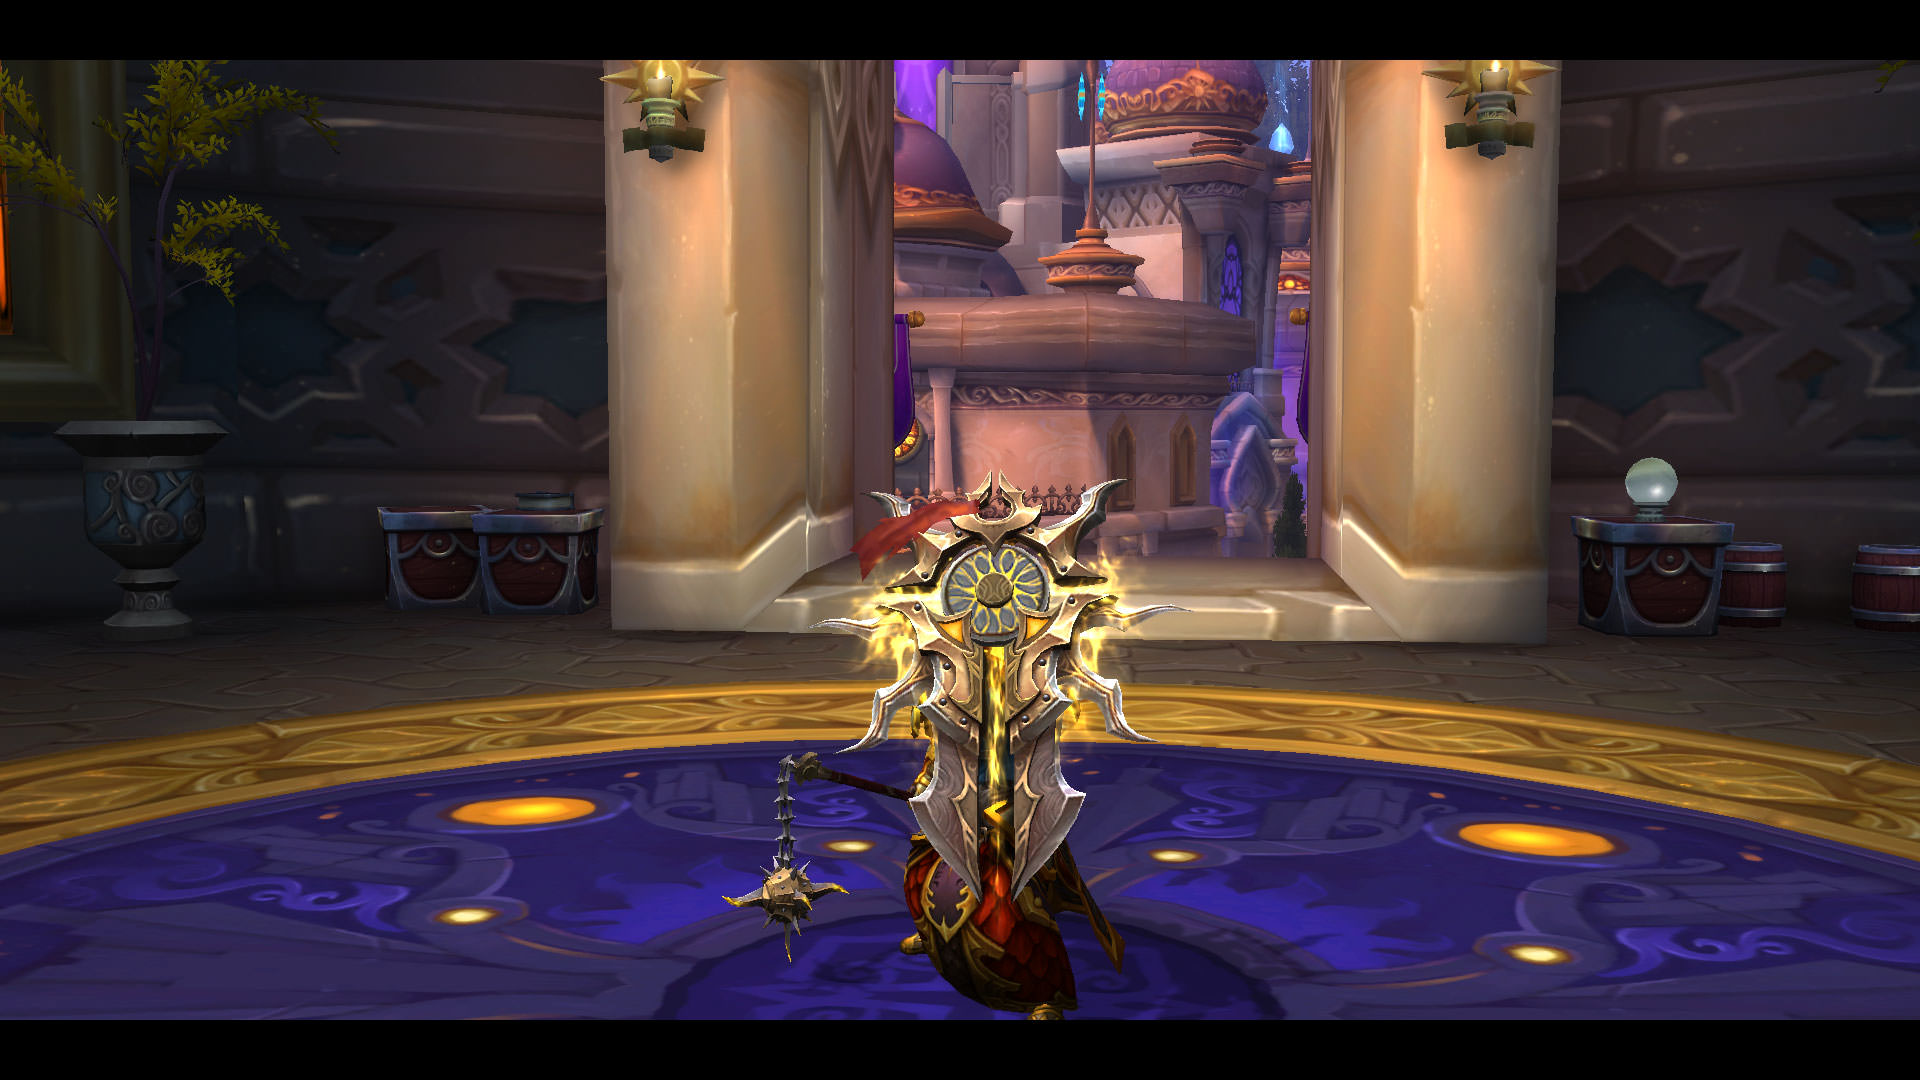 mage tower wow apperances